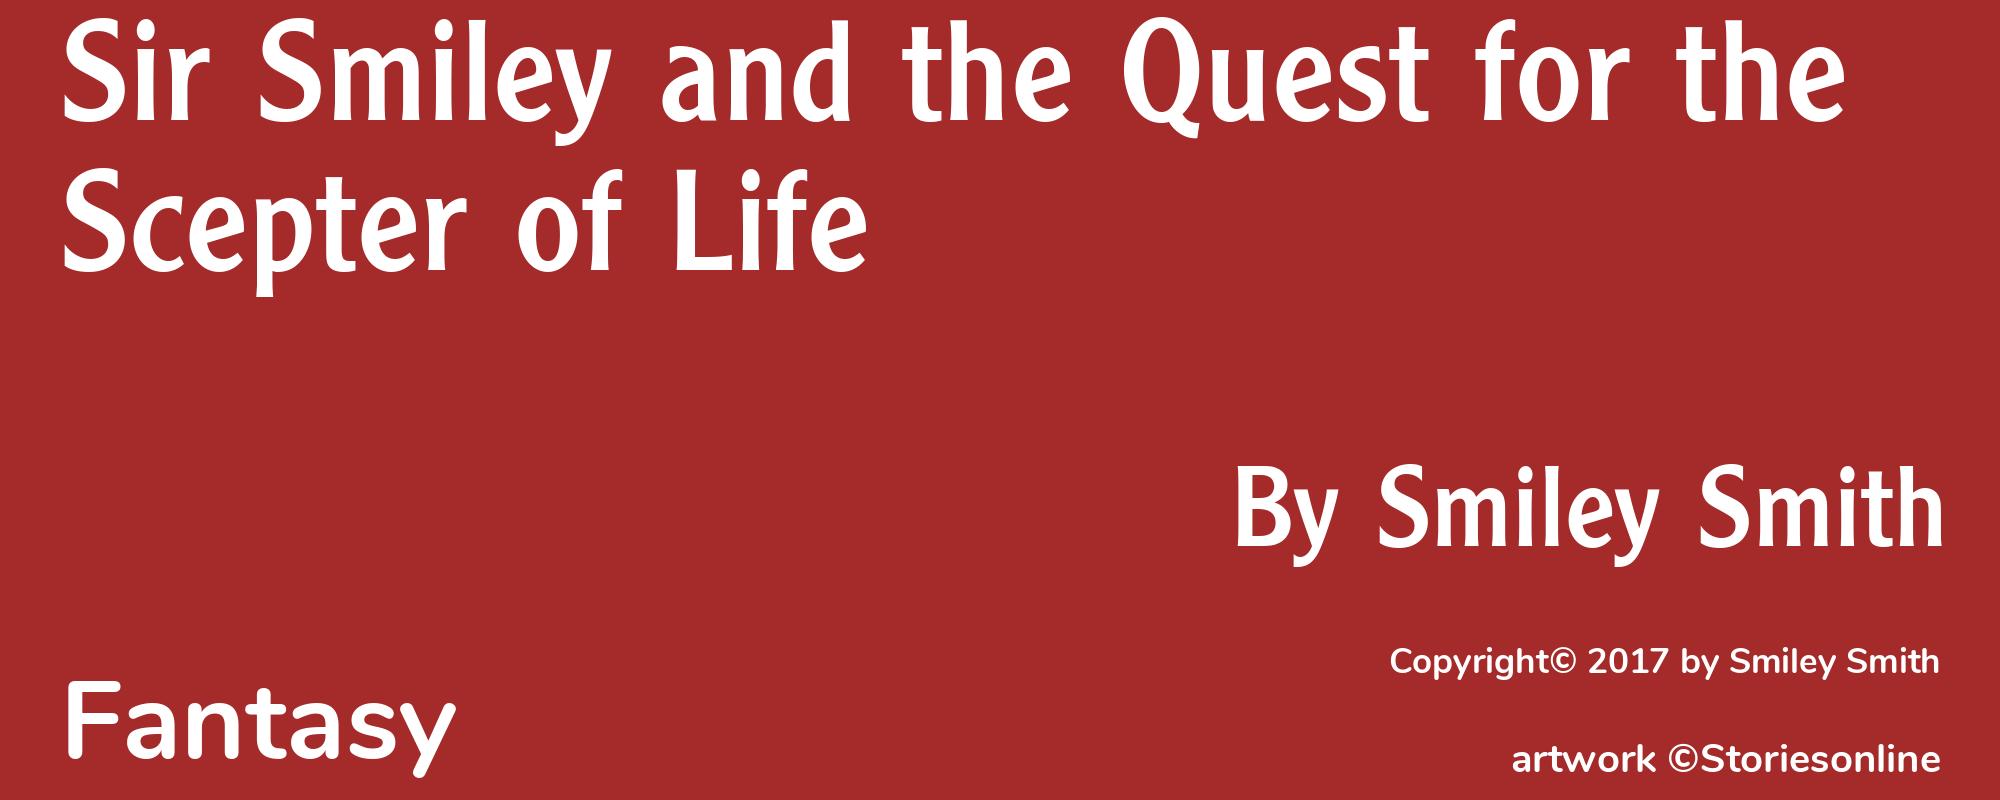 Sir Smiley and the Quest for the Scepter of Life - Cover